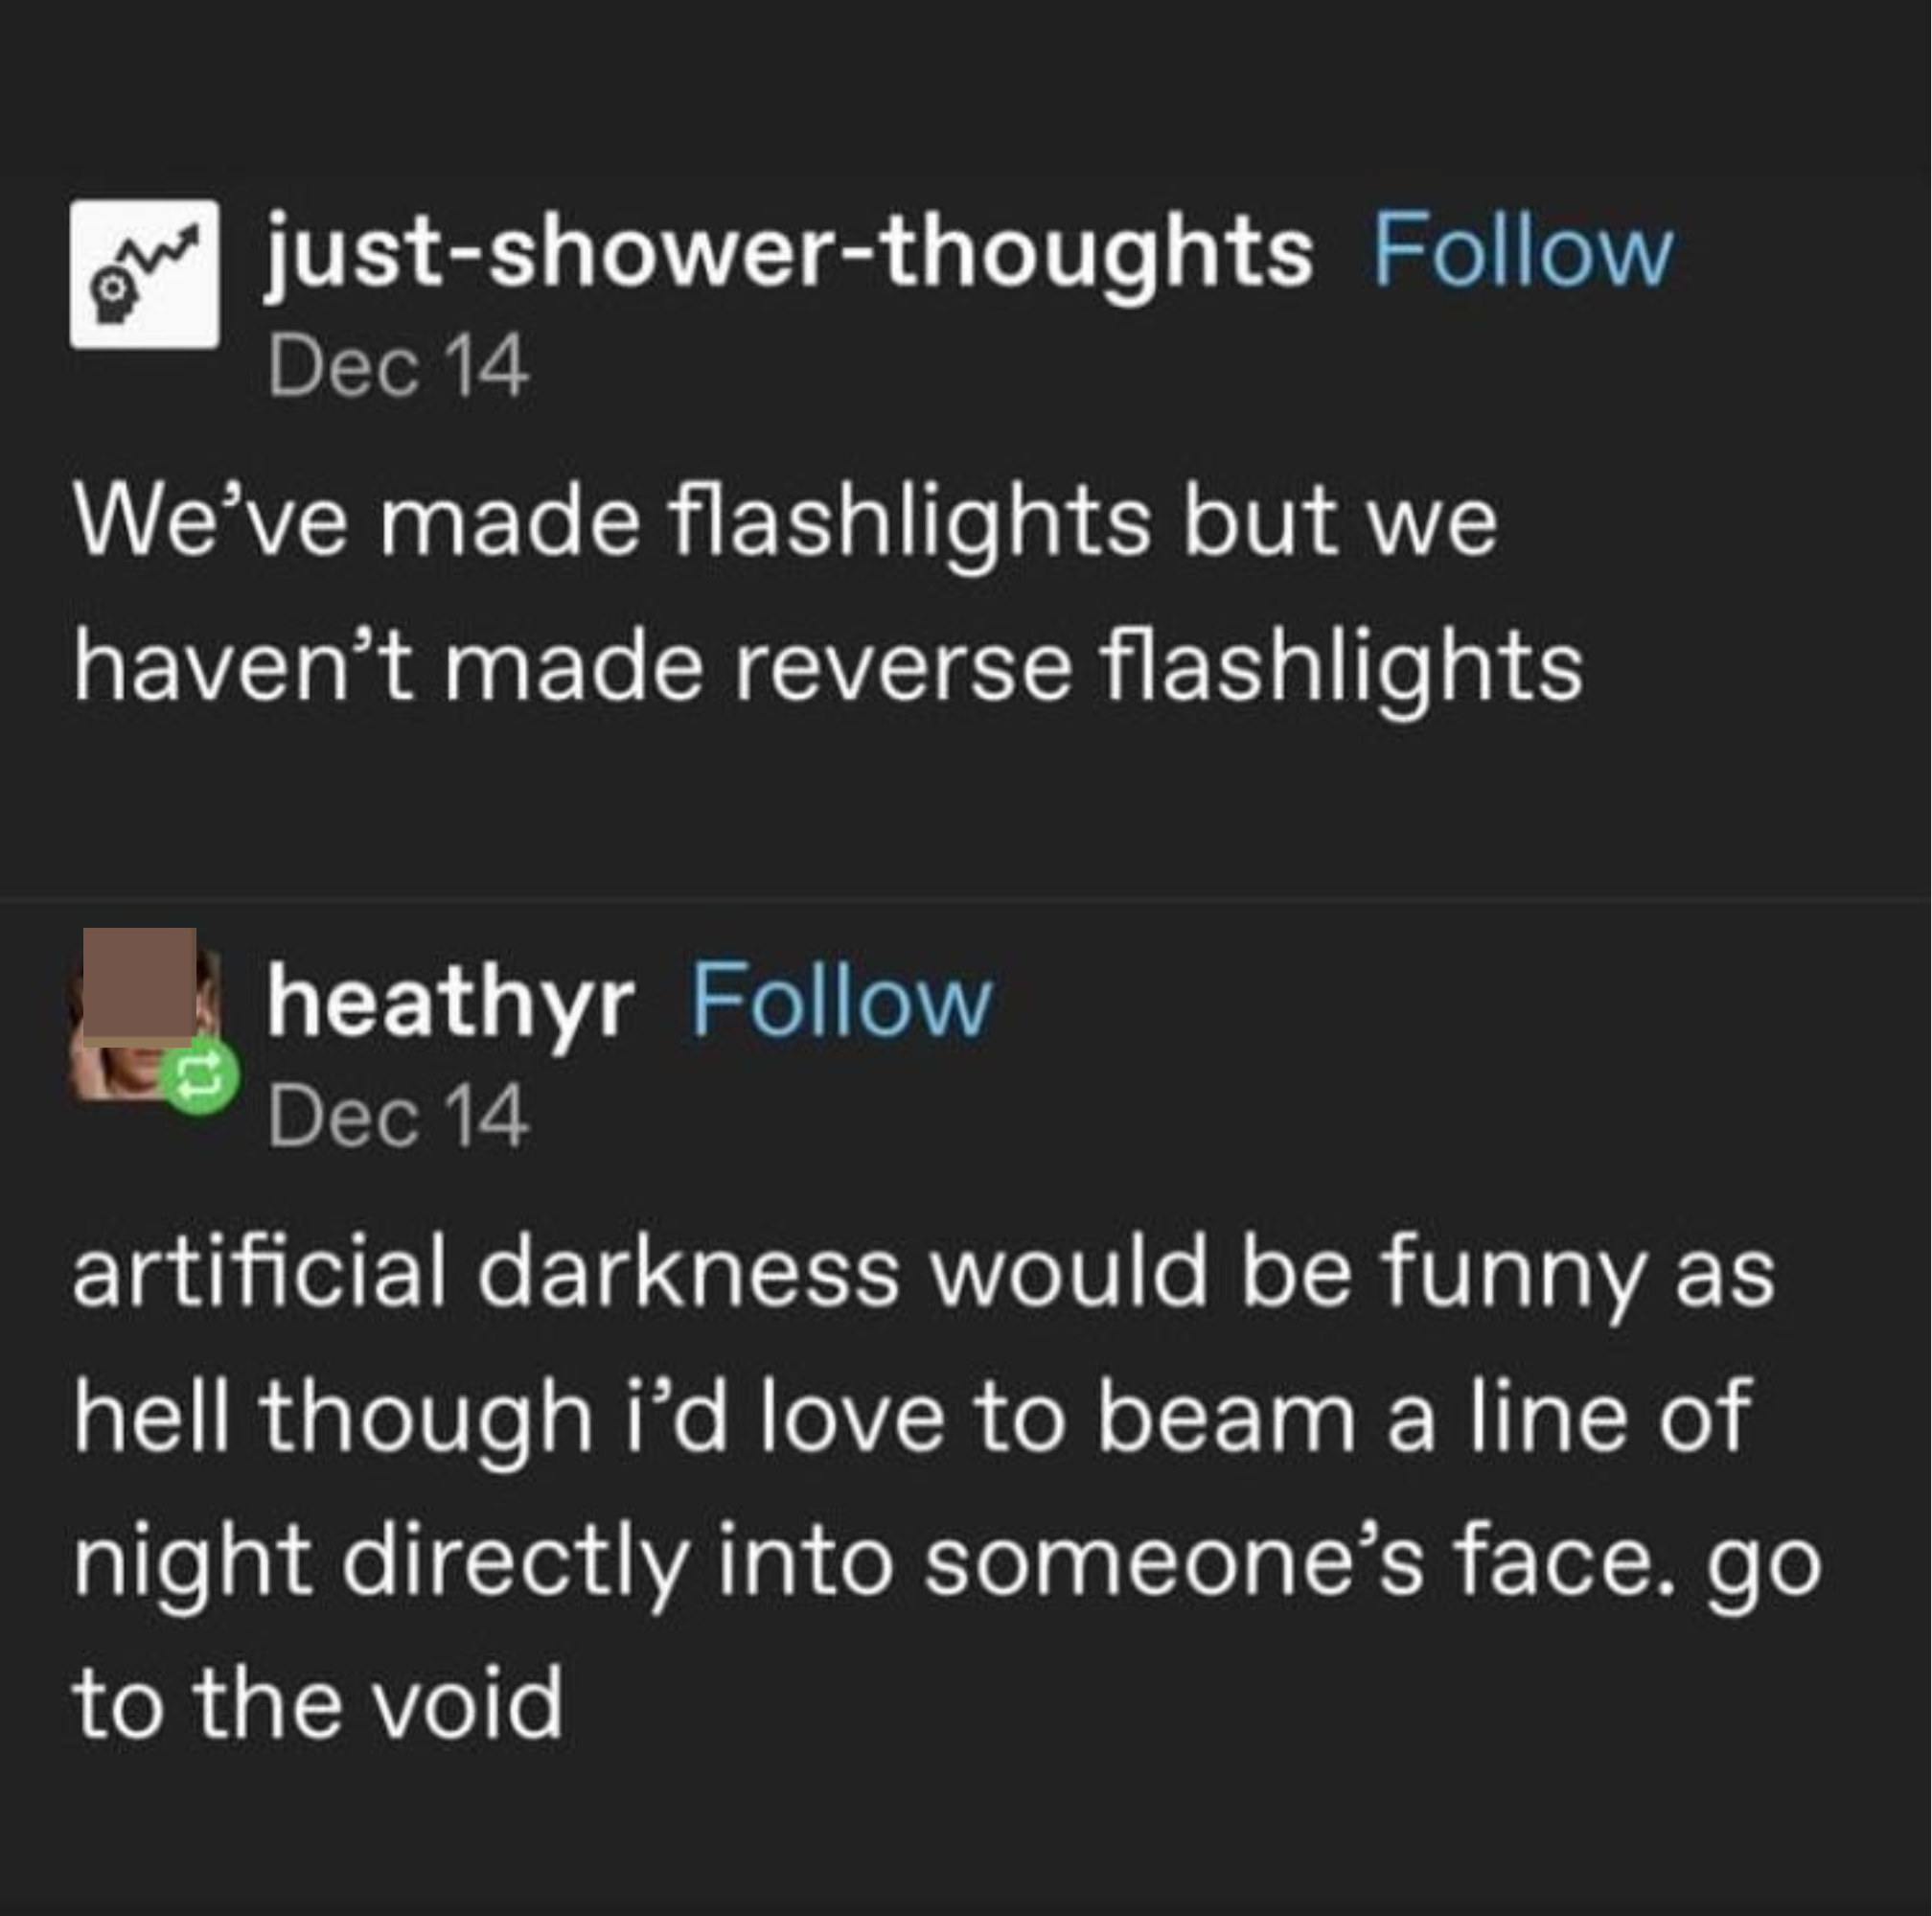 Someone says there should be a flashlight that shines darkness, and someone replies that they would love to hit someone with the void